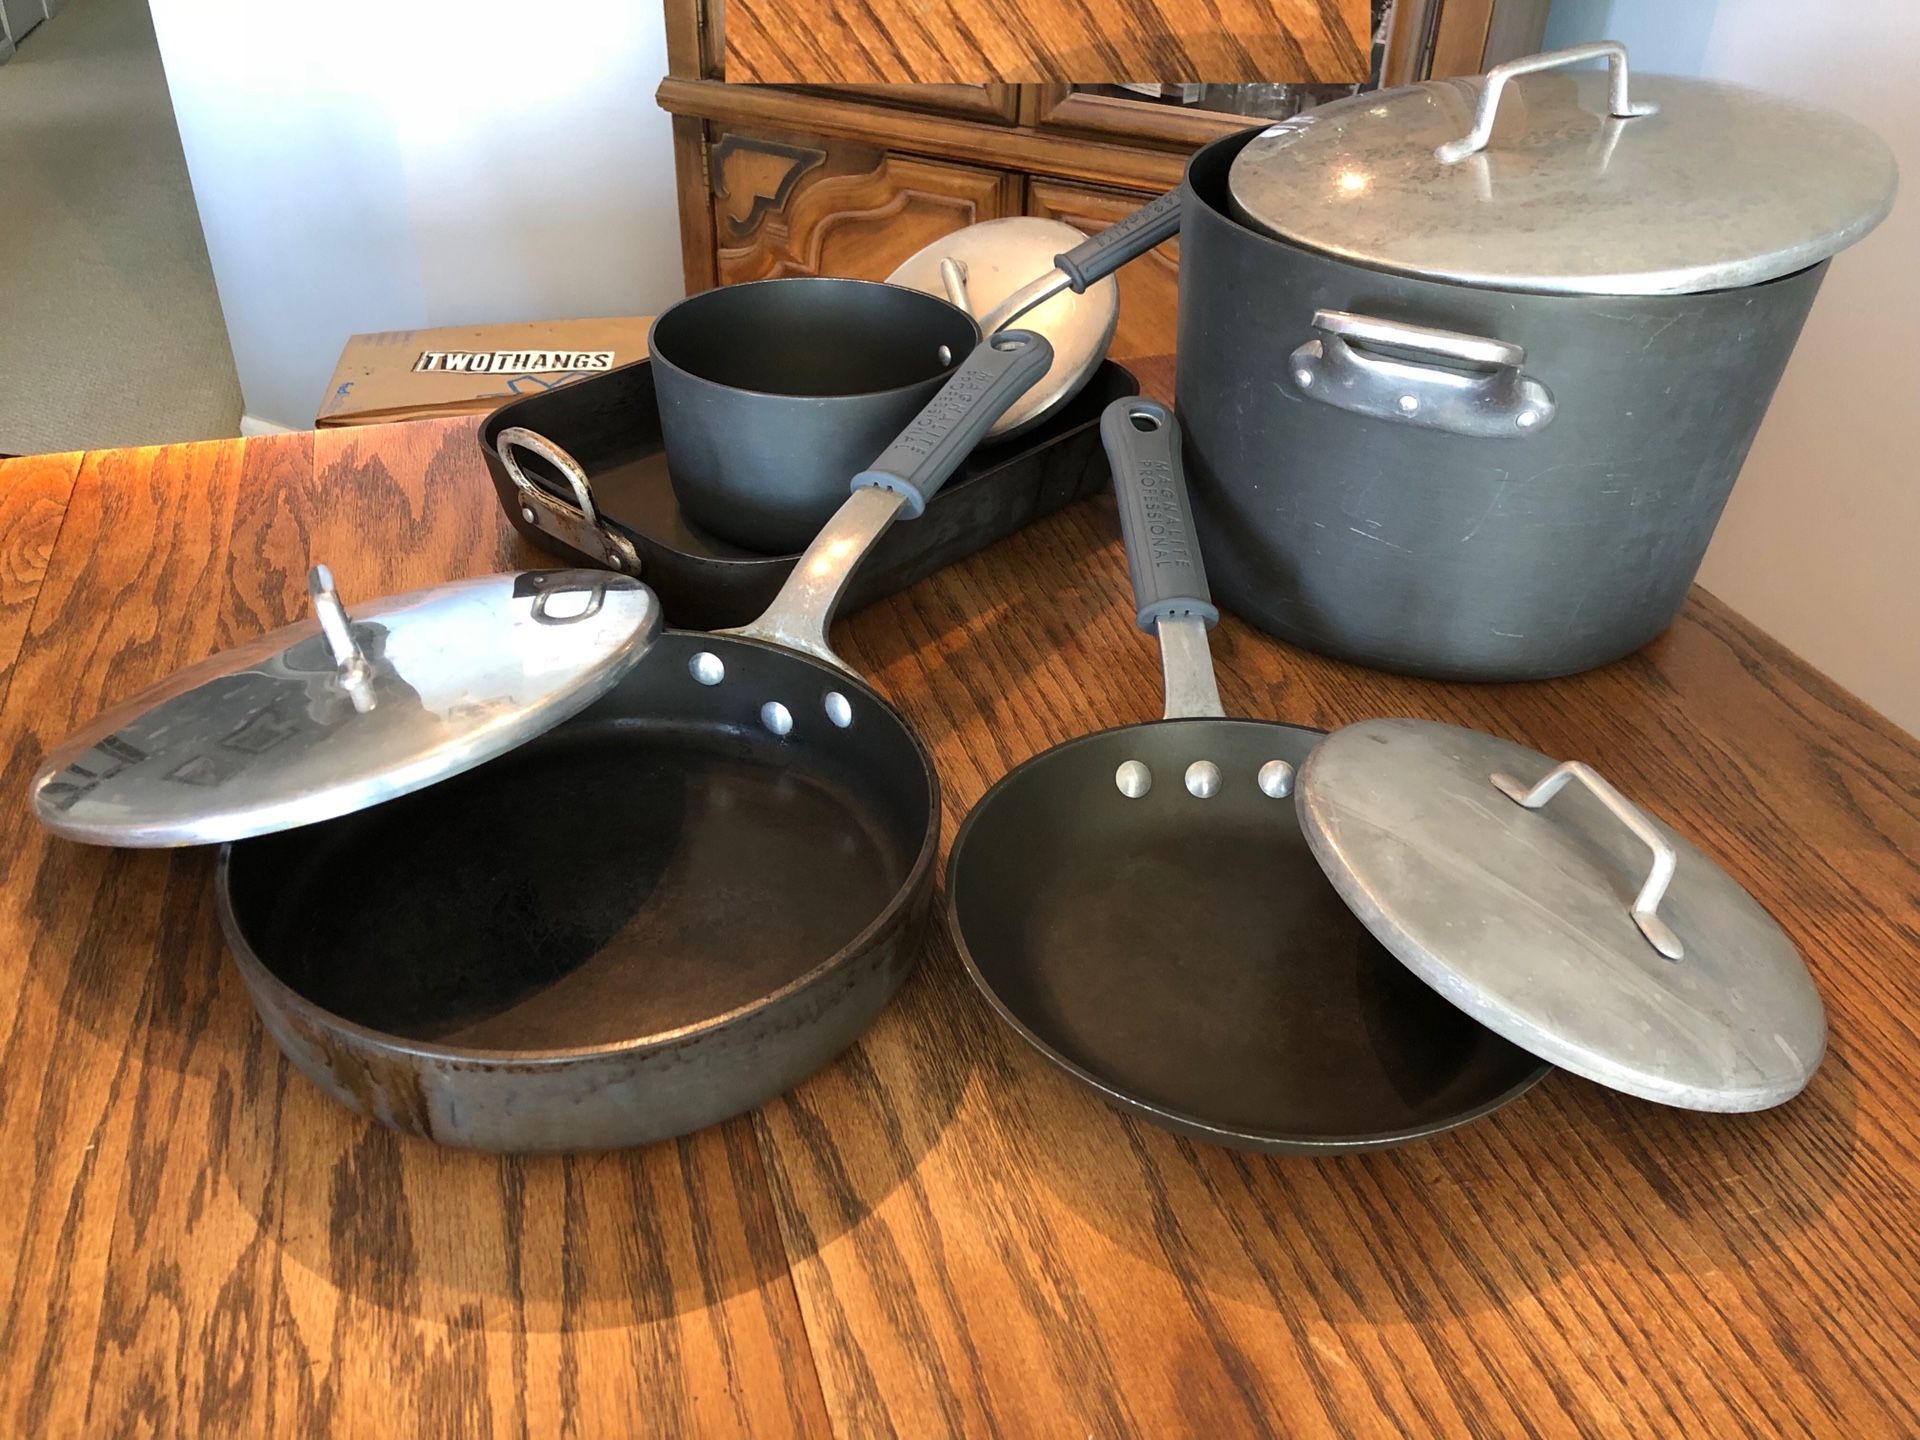 Magnalite Professional Anondized Cookware for Sale in Seattle, WA